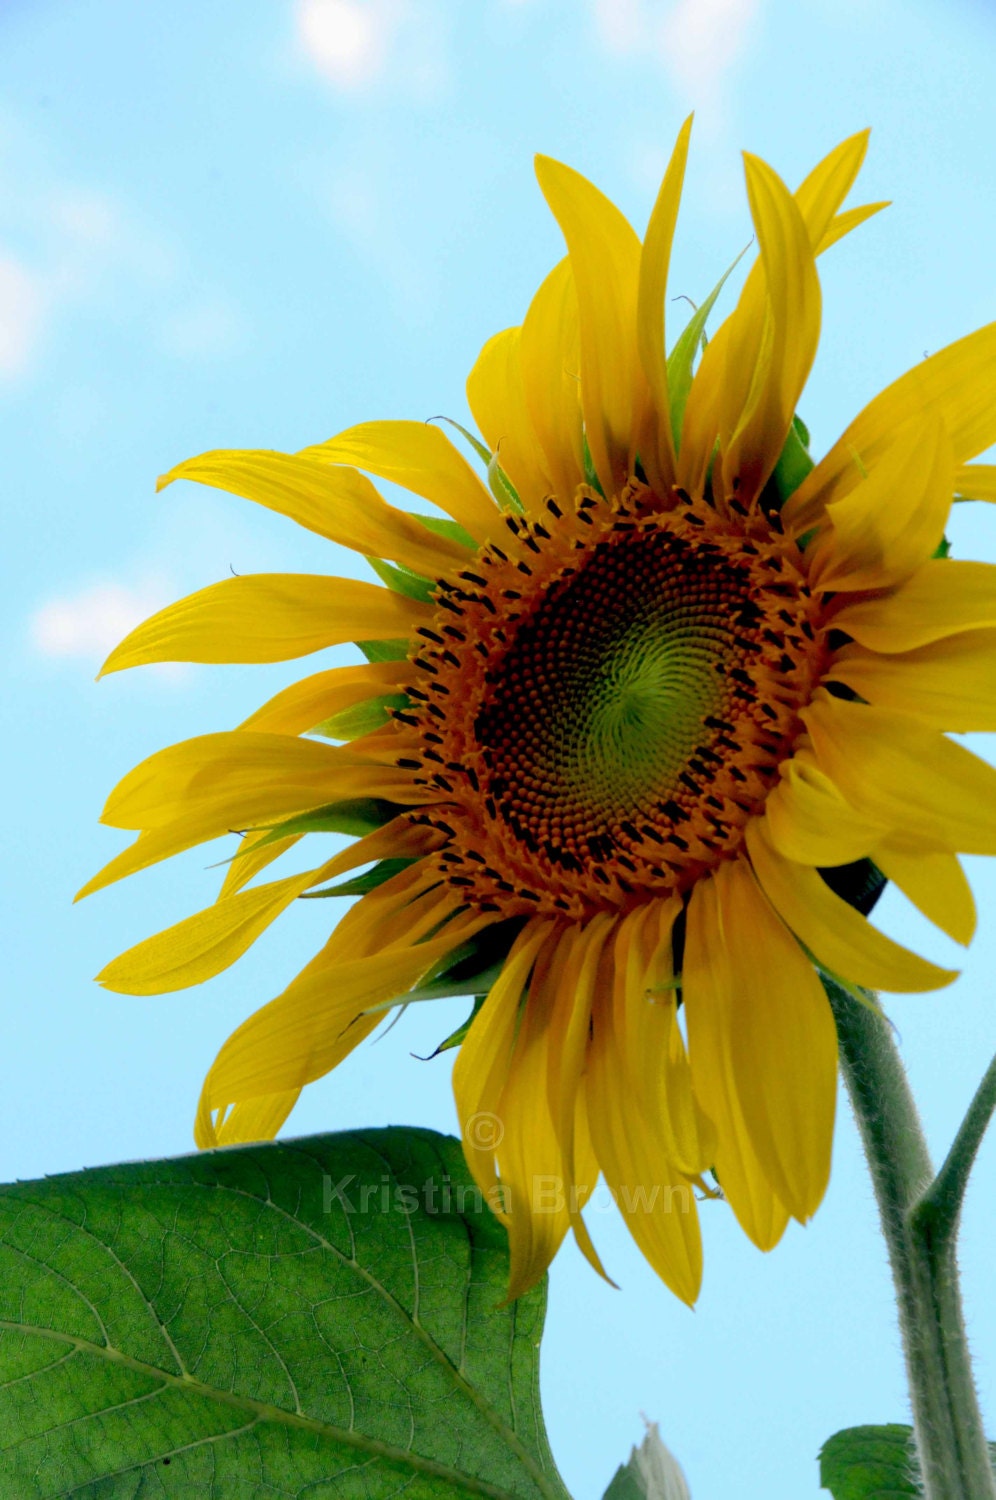 Sunflower Photo, Free Shipping, Flower, Art Print Photograph, Nature Picture, Bright Colorful, Wall Art, Home Decor, Yellow, Blue - SilverBirdBoutique